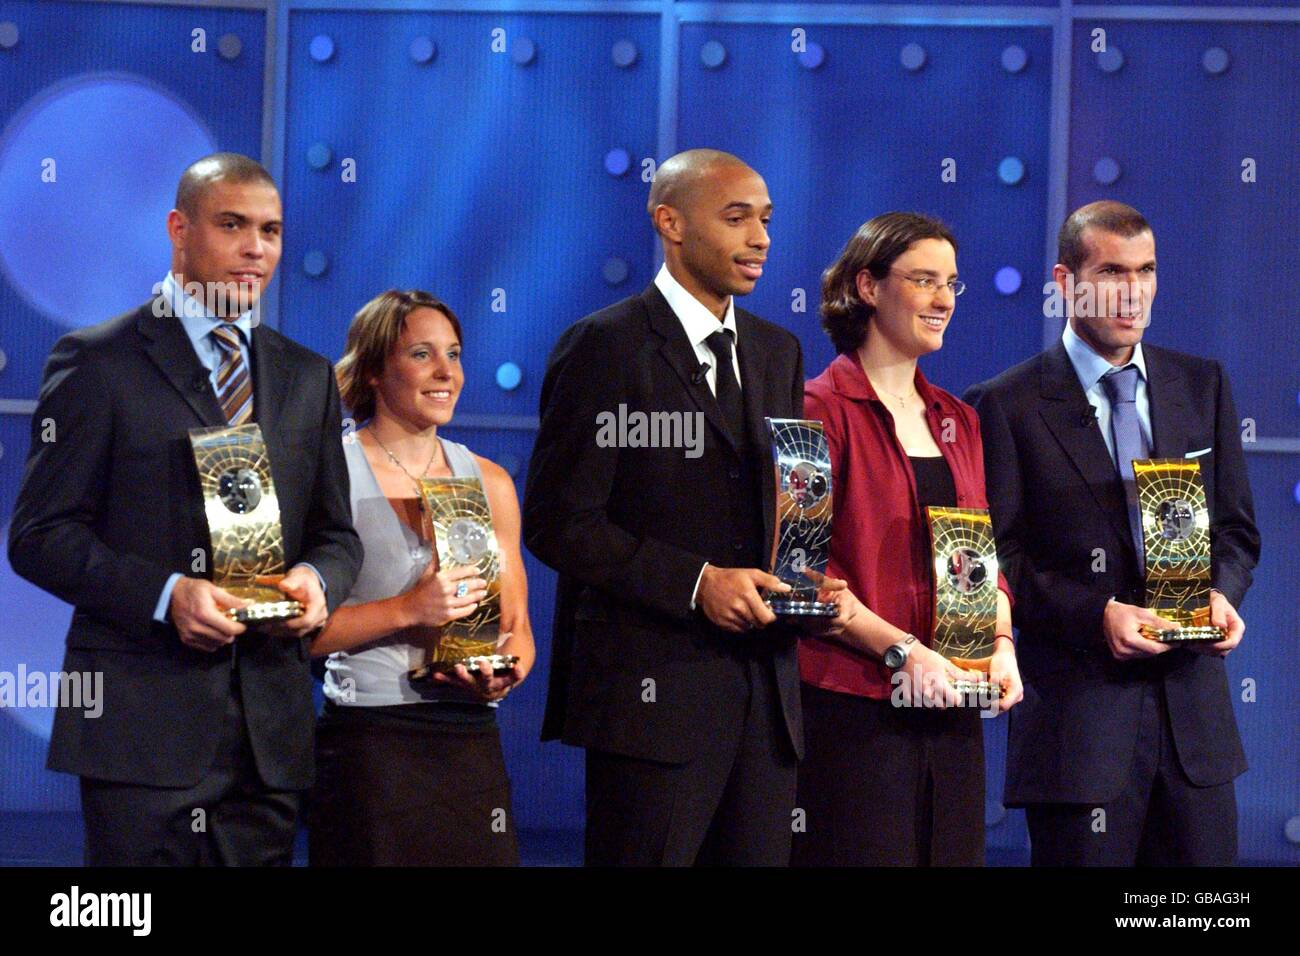 (L-R) Ronaldo, Hanna Ljungberg, Thierry Henry, Birgit Prinz and Zinedine Zidane with the awards at the FIFA World Player Of The Year Awards 2003 Stock Photo